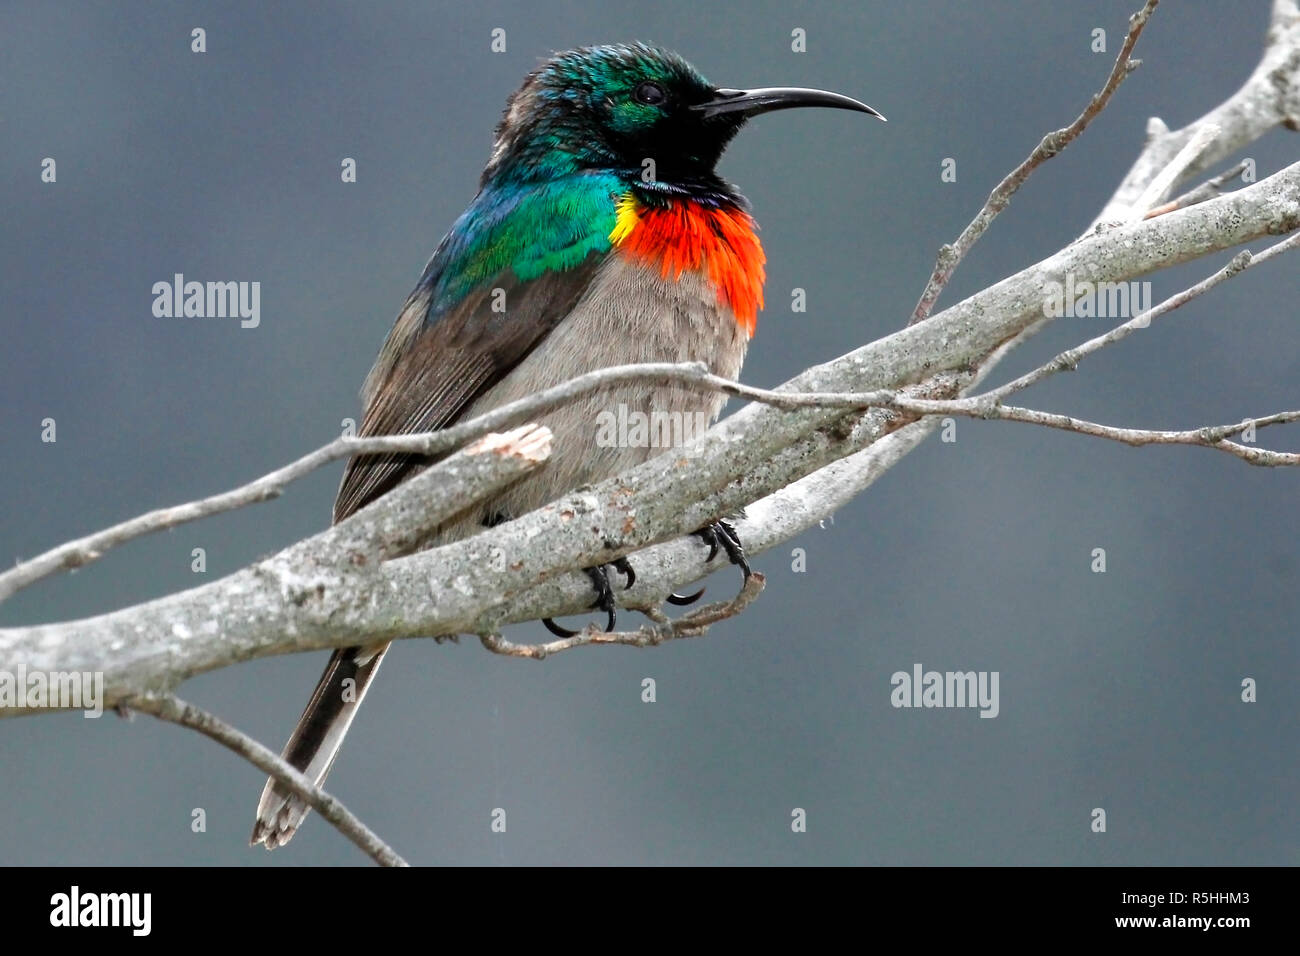 A male Southern double-collared sunbird sitting on a branch with its feathers fluffed up to keep warm on a cold misty day in Cape Town. Stock Photo